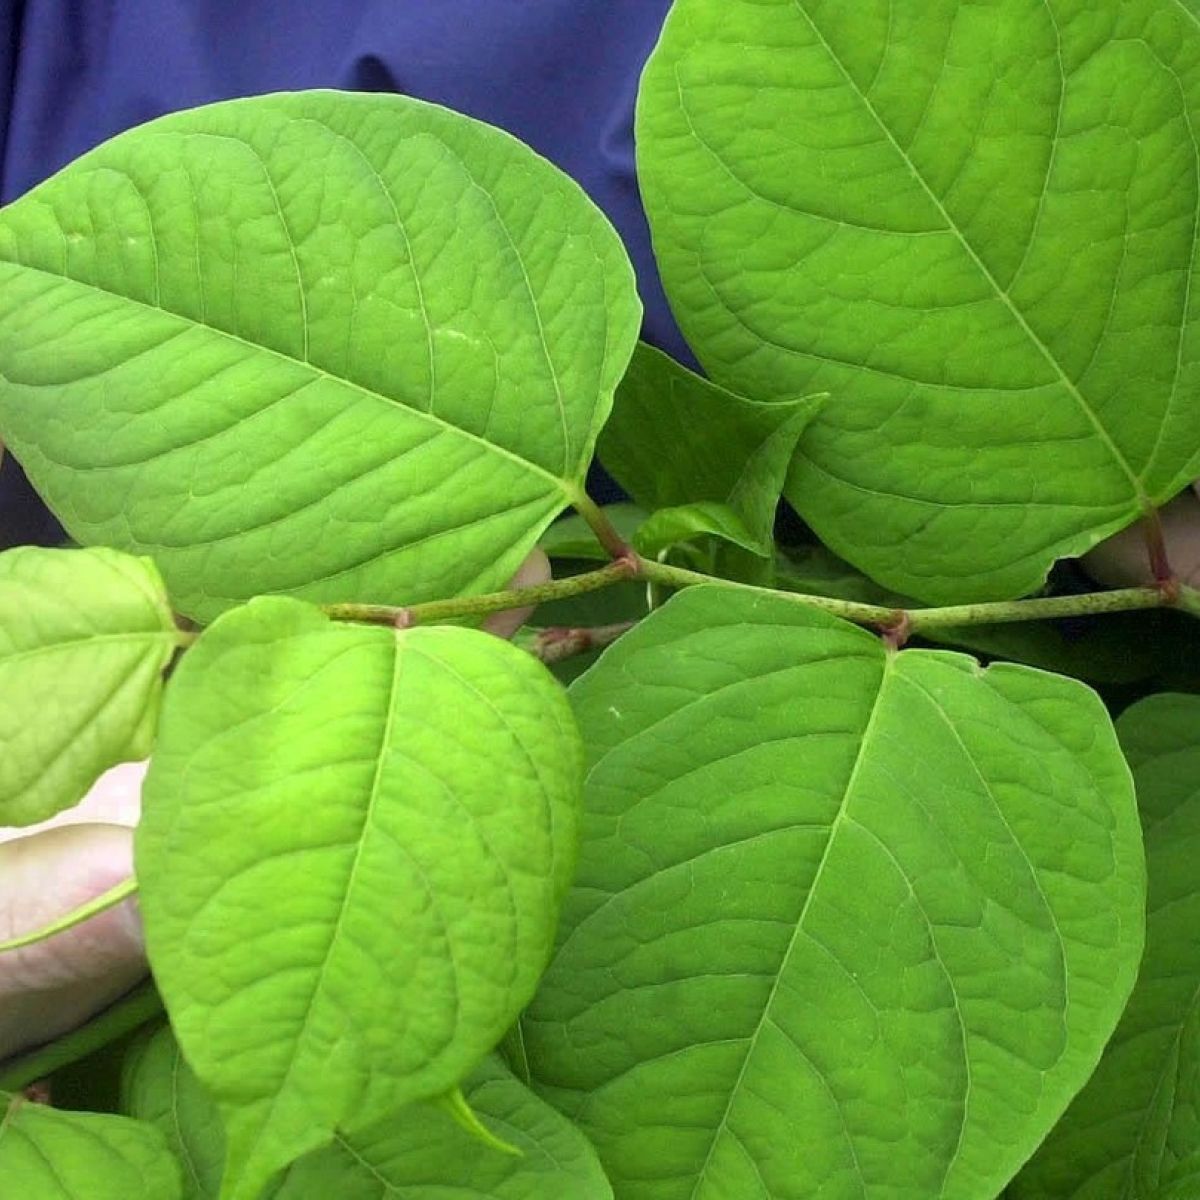 We Are Worried About Our Neighbour S Japanese Knotweed Plant Spreading